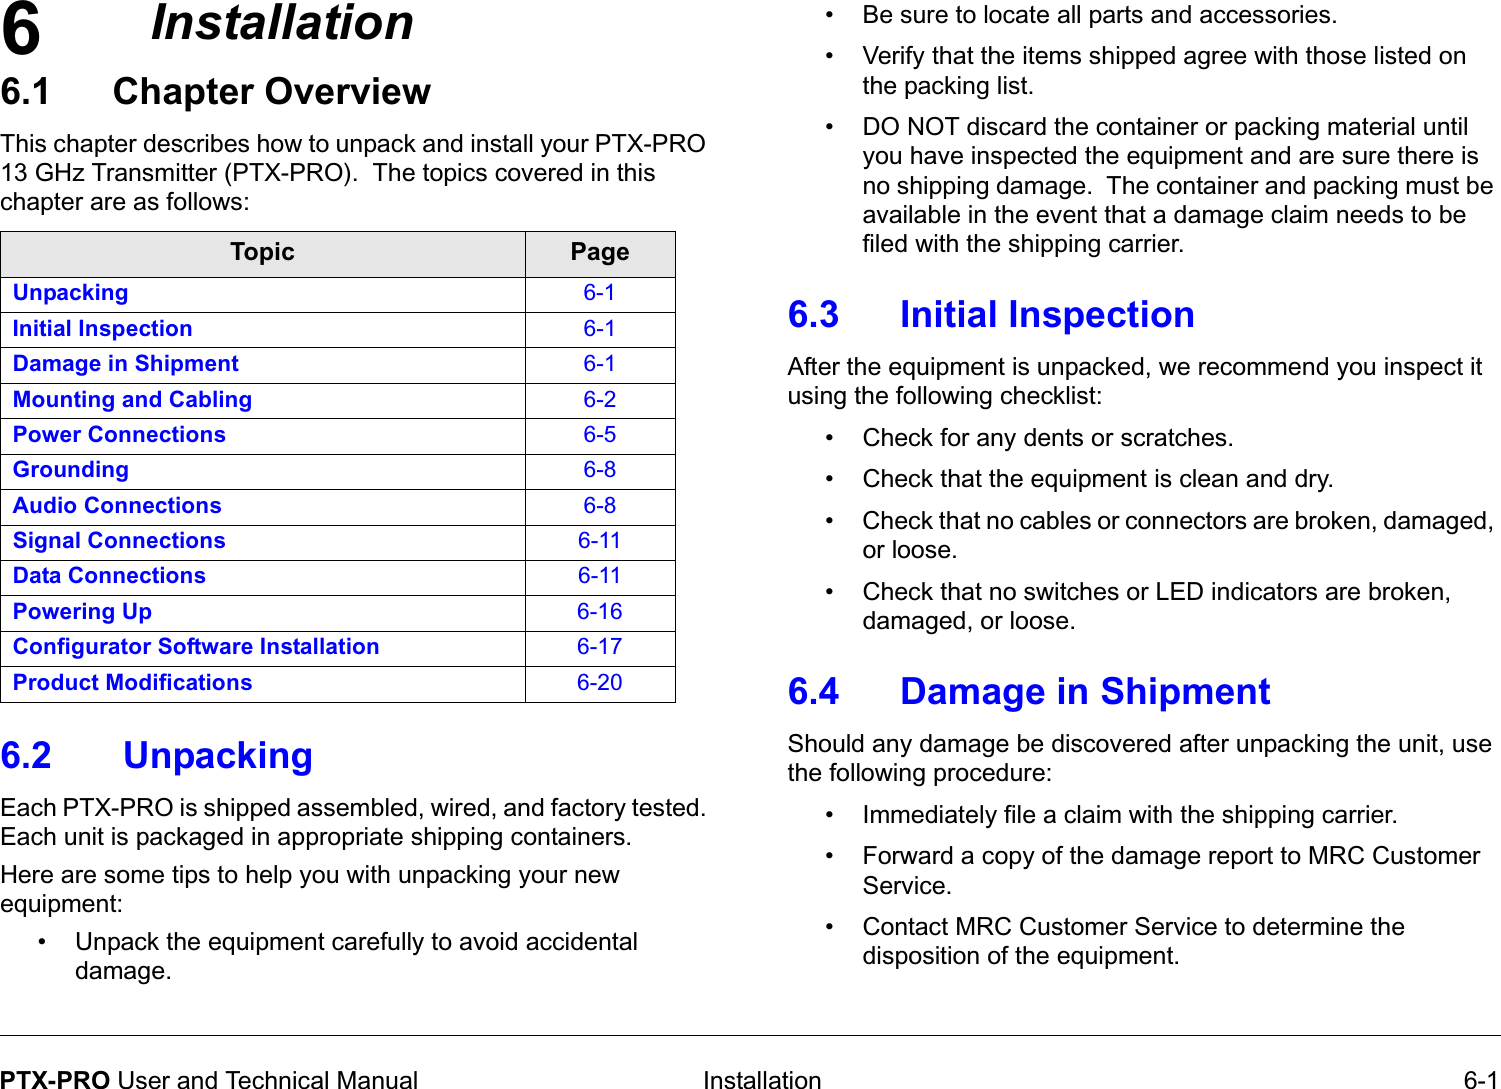 6 Installation 6-1PTX-PRO User and Technical ManualInstallation6.1 Chapter Overview   This chapter describes how to unpack and install your PTX-PRO 13 GHz Transmitter (PTX-PRO).  The topics covered in this chapter are as follows: 6.2  Unpacking  Each PTX-PRO is shipped assembled, wired, and factory tested. Each unit is packaged in appropriate shipping containers. Here are some tips to help you with unpacking your new equipment: • Unpack the equipment carefully to avoid accidental damage.Topic PageUnpacking 6-1Initial Inspection 6-1Damage in Shipment 6-1Mounting and Cabling 6-2Power Connections 6-5Grounding 6-8Audio Connections 6-8Signal Connections 6-11Data Connections 6-11Powering Up 6-16Configurator Software Installation 6-17Product Modifications 6-20• Be sure to locate all parts and accessories.• Verify that the items shipped agree with those listed on the packing list.• DO NOT discard the container or packing material until you have inspected the equipment and are sure there is no shipping damage.  The container and packing must be available in the event that a damage claim needs to be filed with the shipping carrier.6.3 Initial InspectionAfter the equipment is unpacked, we recommend you inspect it using the following checklist:• Check for any dents or scratches.   • Check that the equipment is clean and dry.• Check that no cables or connectors are broken, damaged, or loose.• Check that no switches or LED indicators are broken, damaged, or loose.6.4 Damage in ShipmentShould any damage be discovered after unpacking the unit, use the following procedure:• Immediately file a claim with the shipping carrier. • Forward a copy of the damage report to MRC Customer Service. • Contact MRC Customer Service to determine the disposition of the equipment.